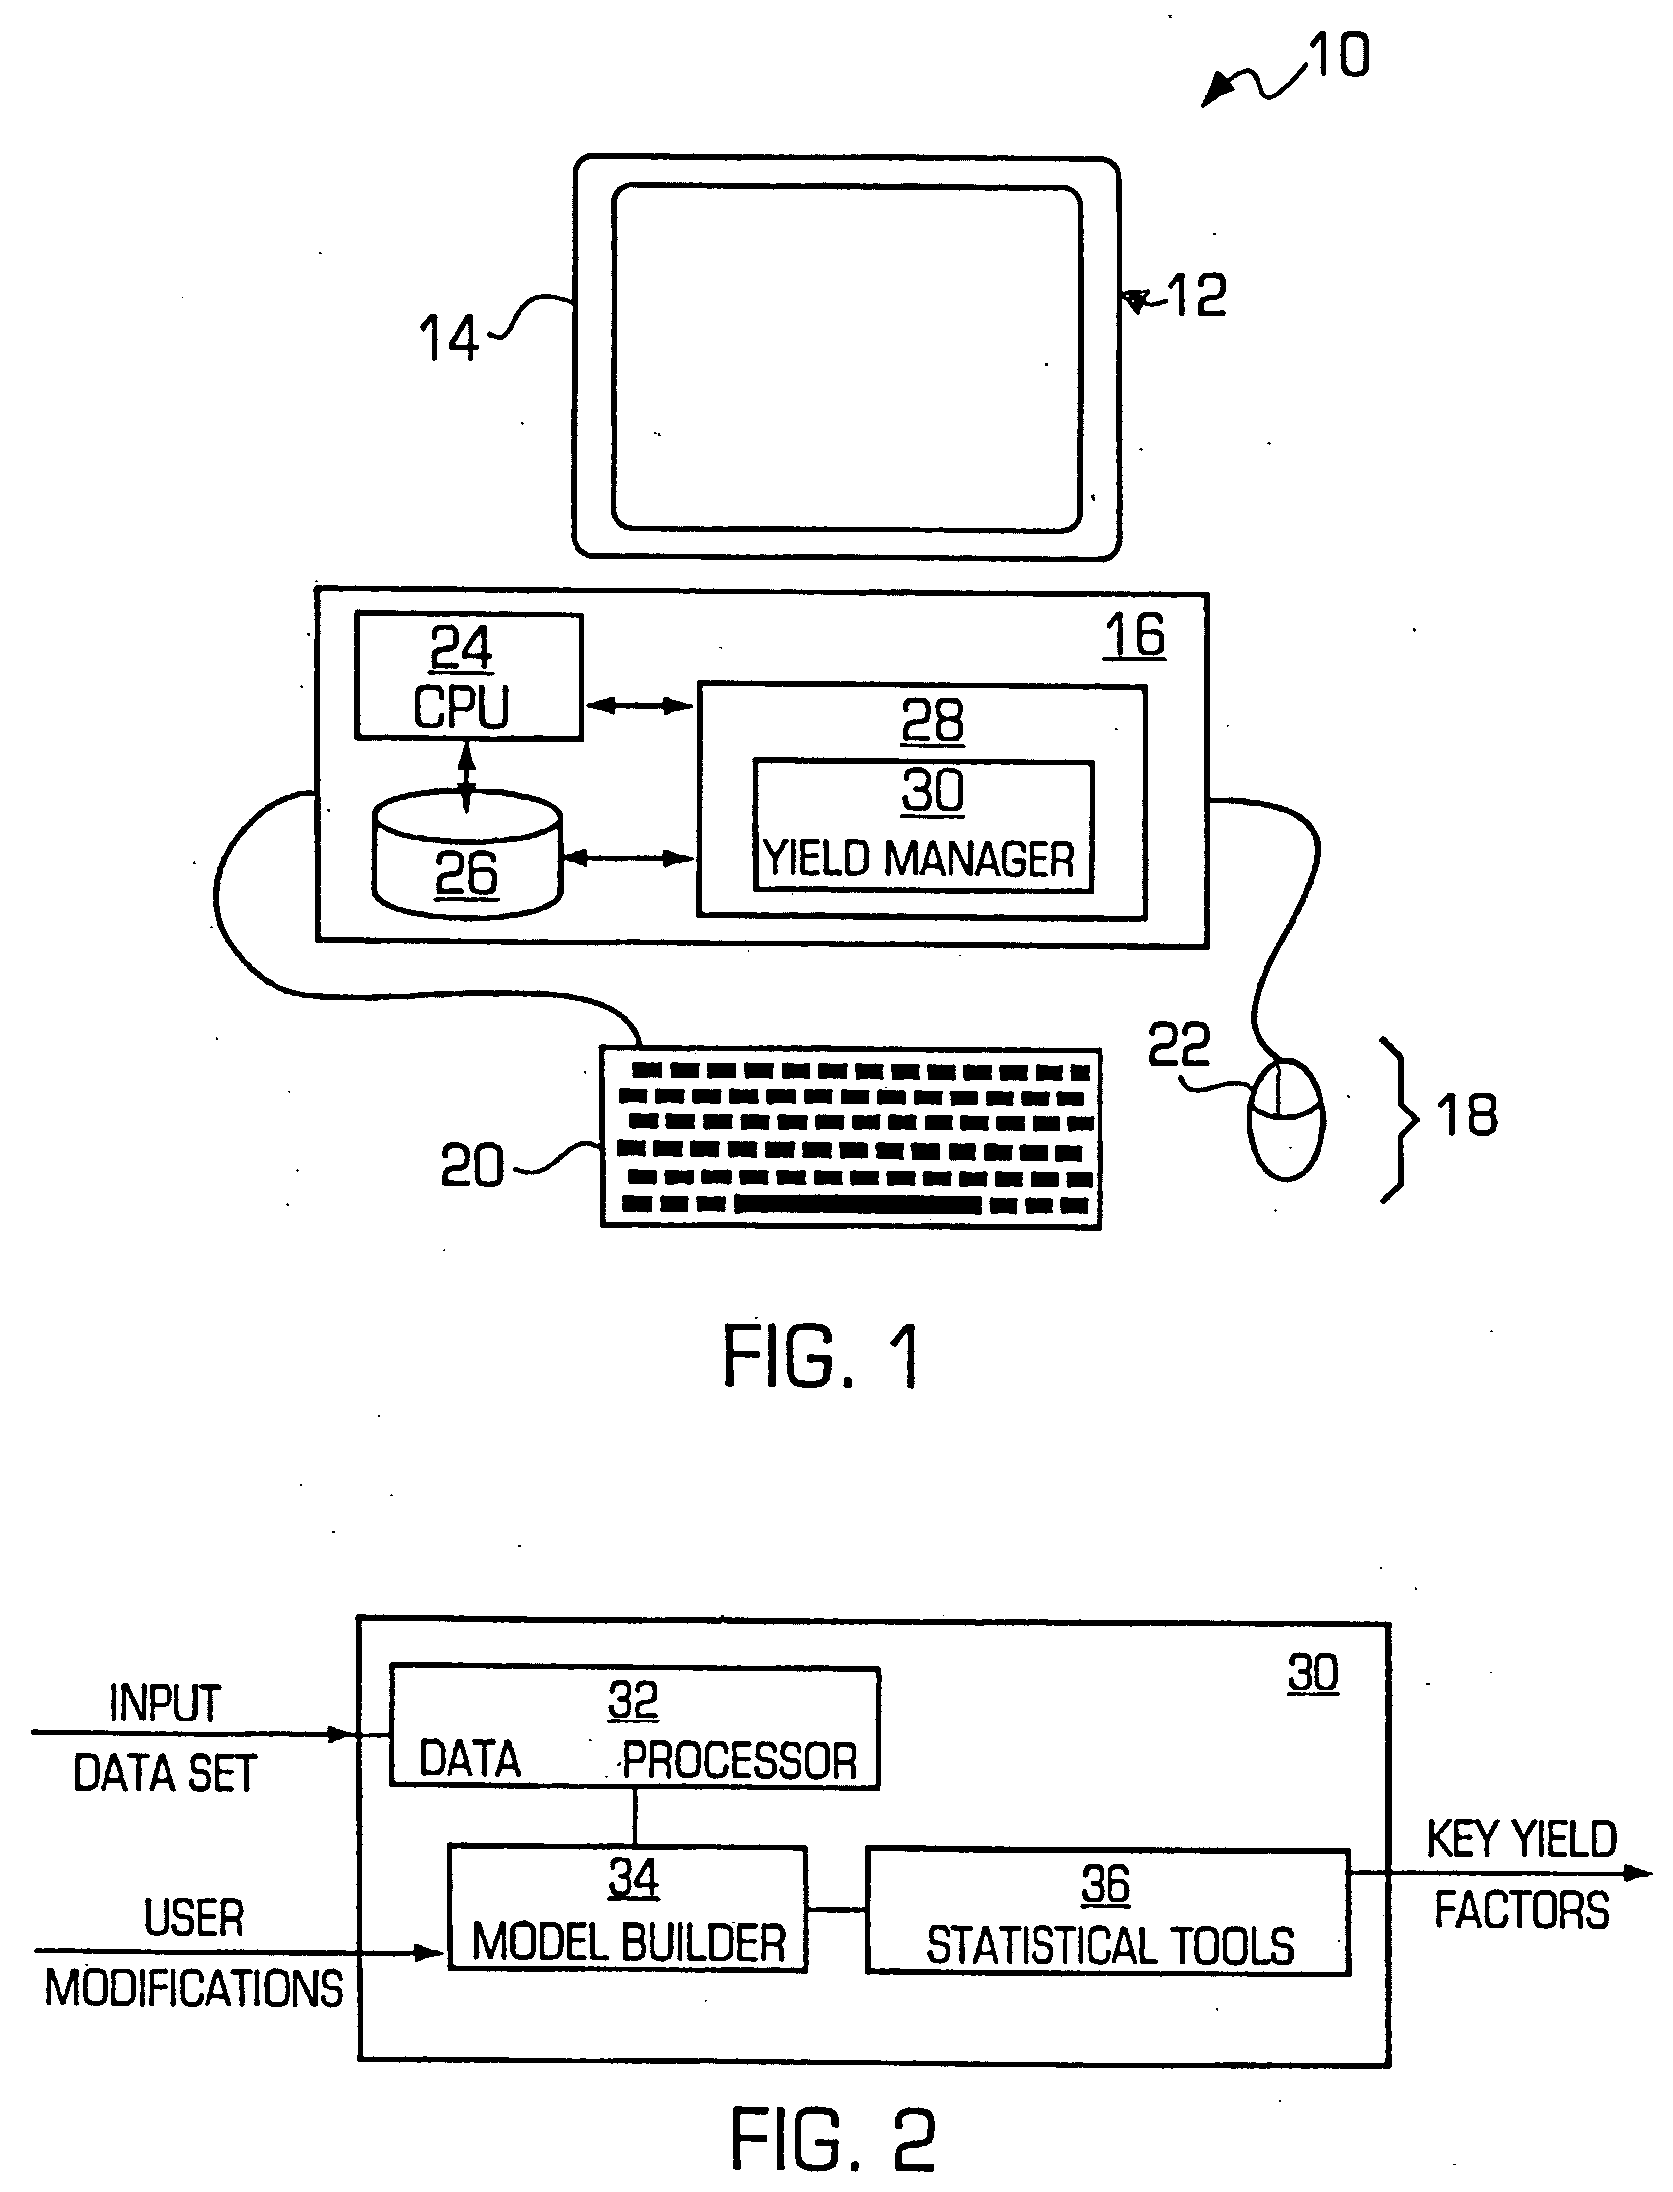 Semiconductor yield management system and method